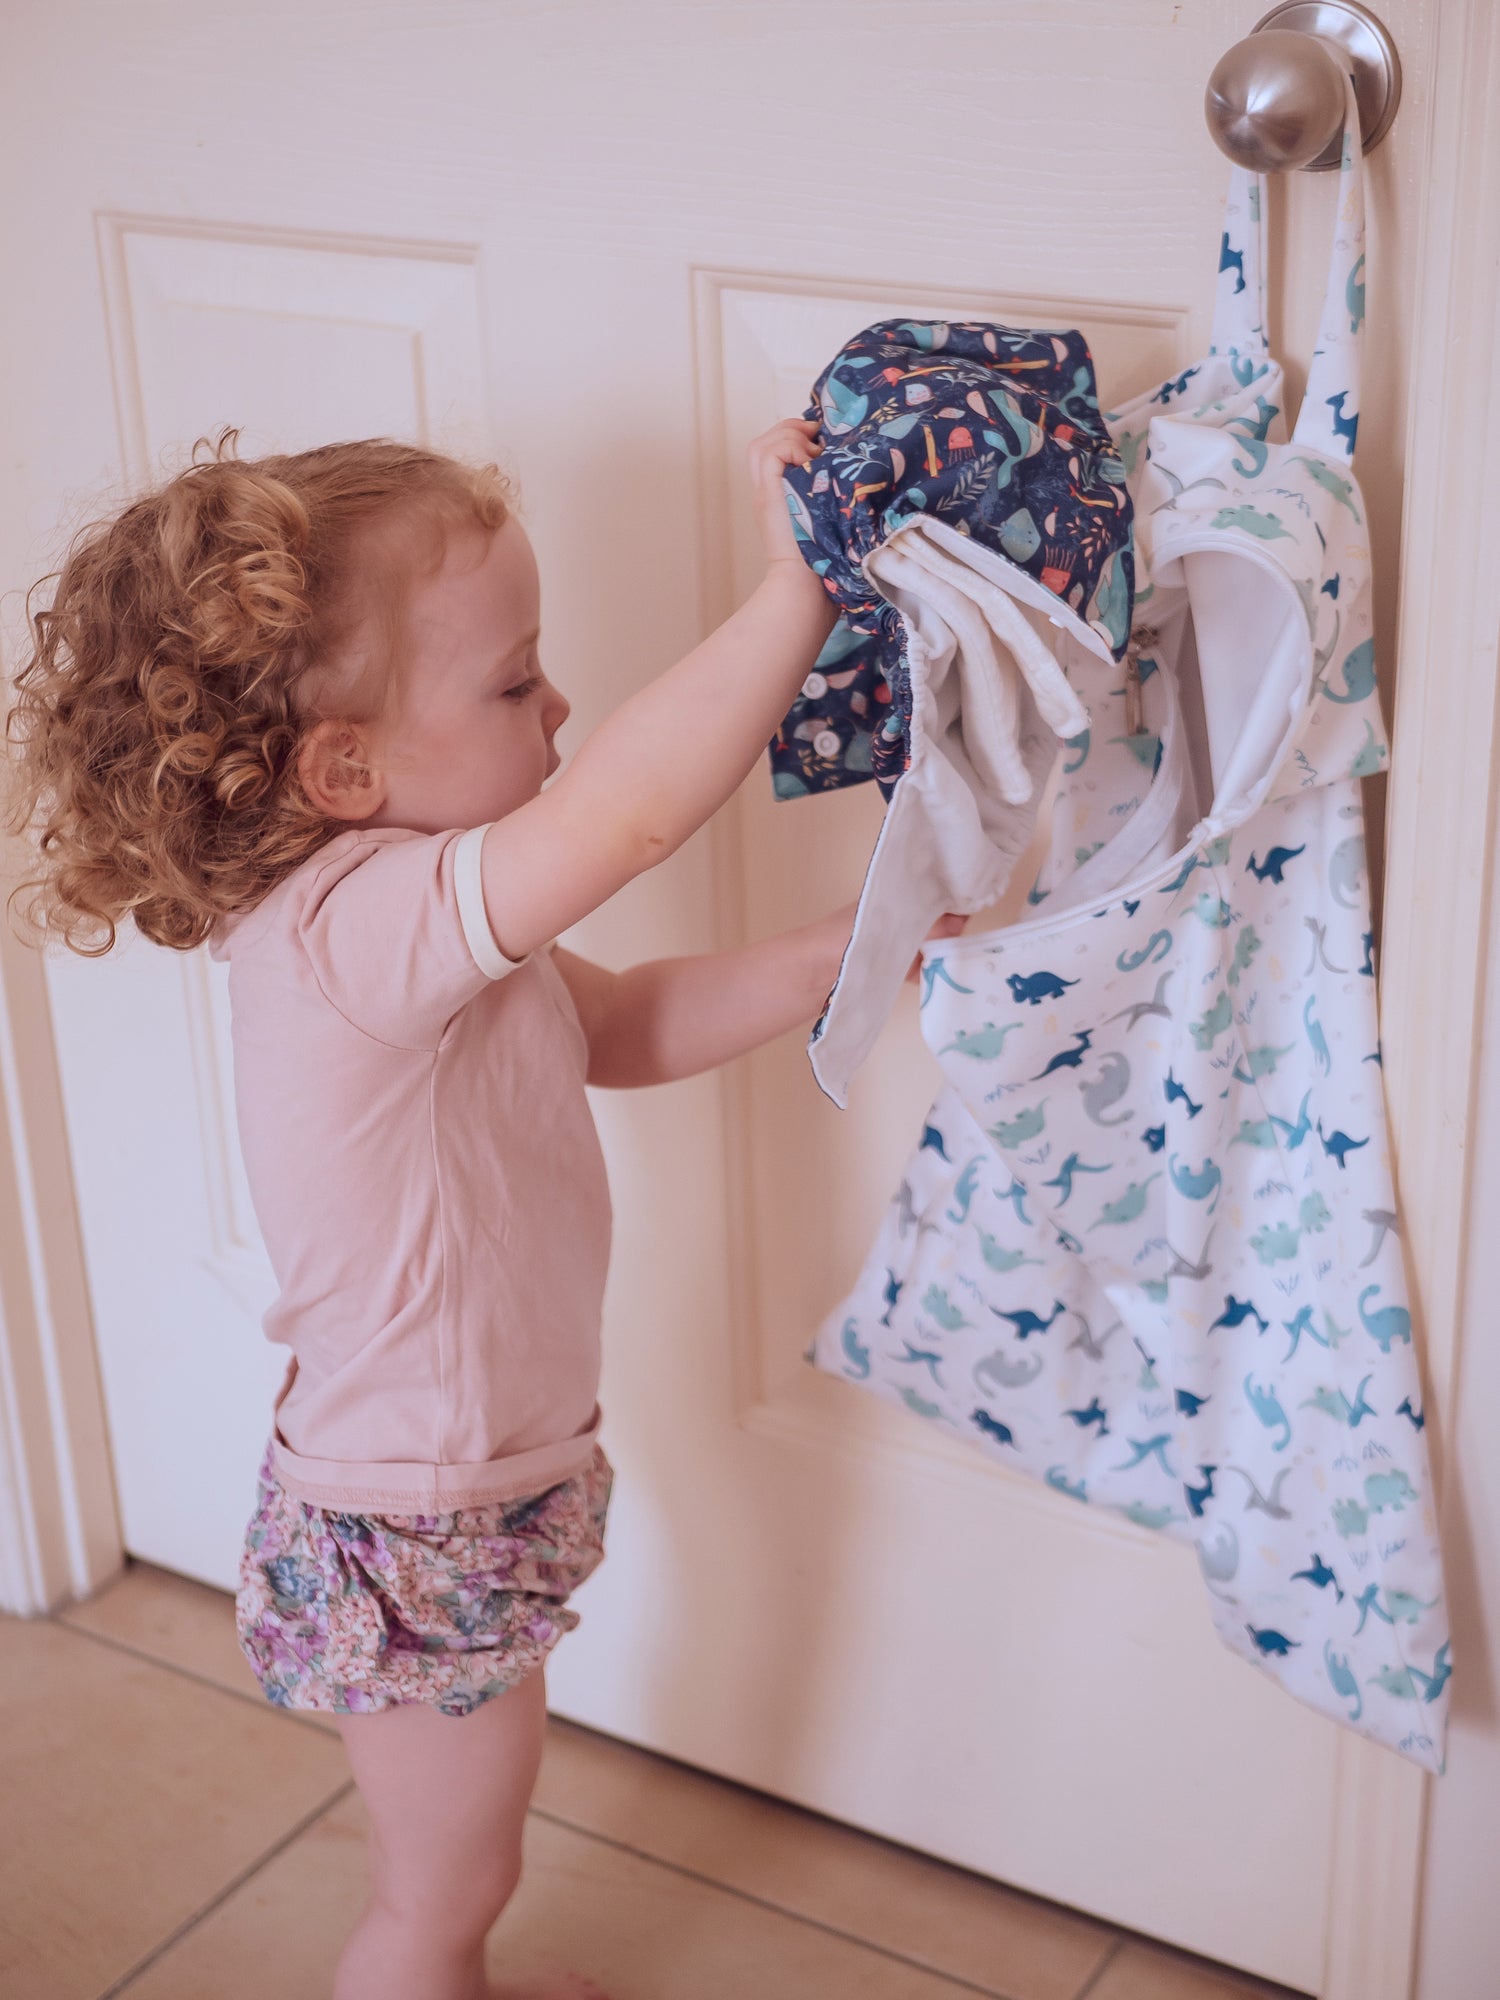 The toddler puts used cloth nappies into an XL wet bag hanging on the doorknob. She has curly red hair and is wearing pink clothes.